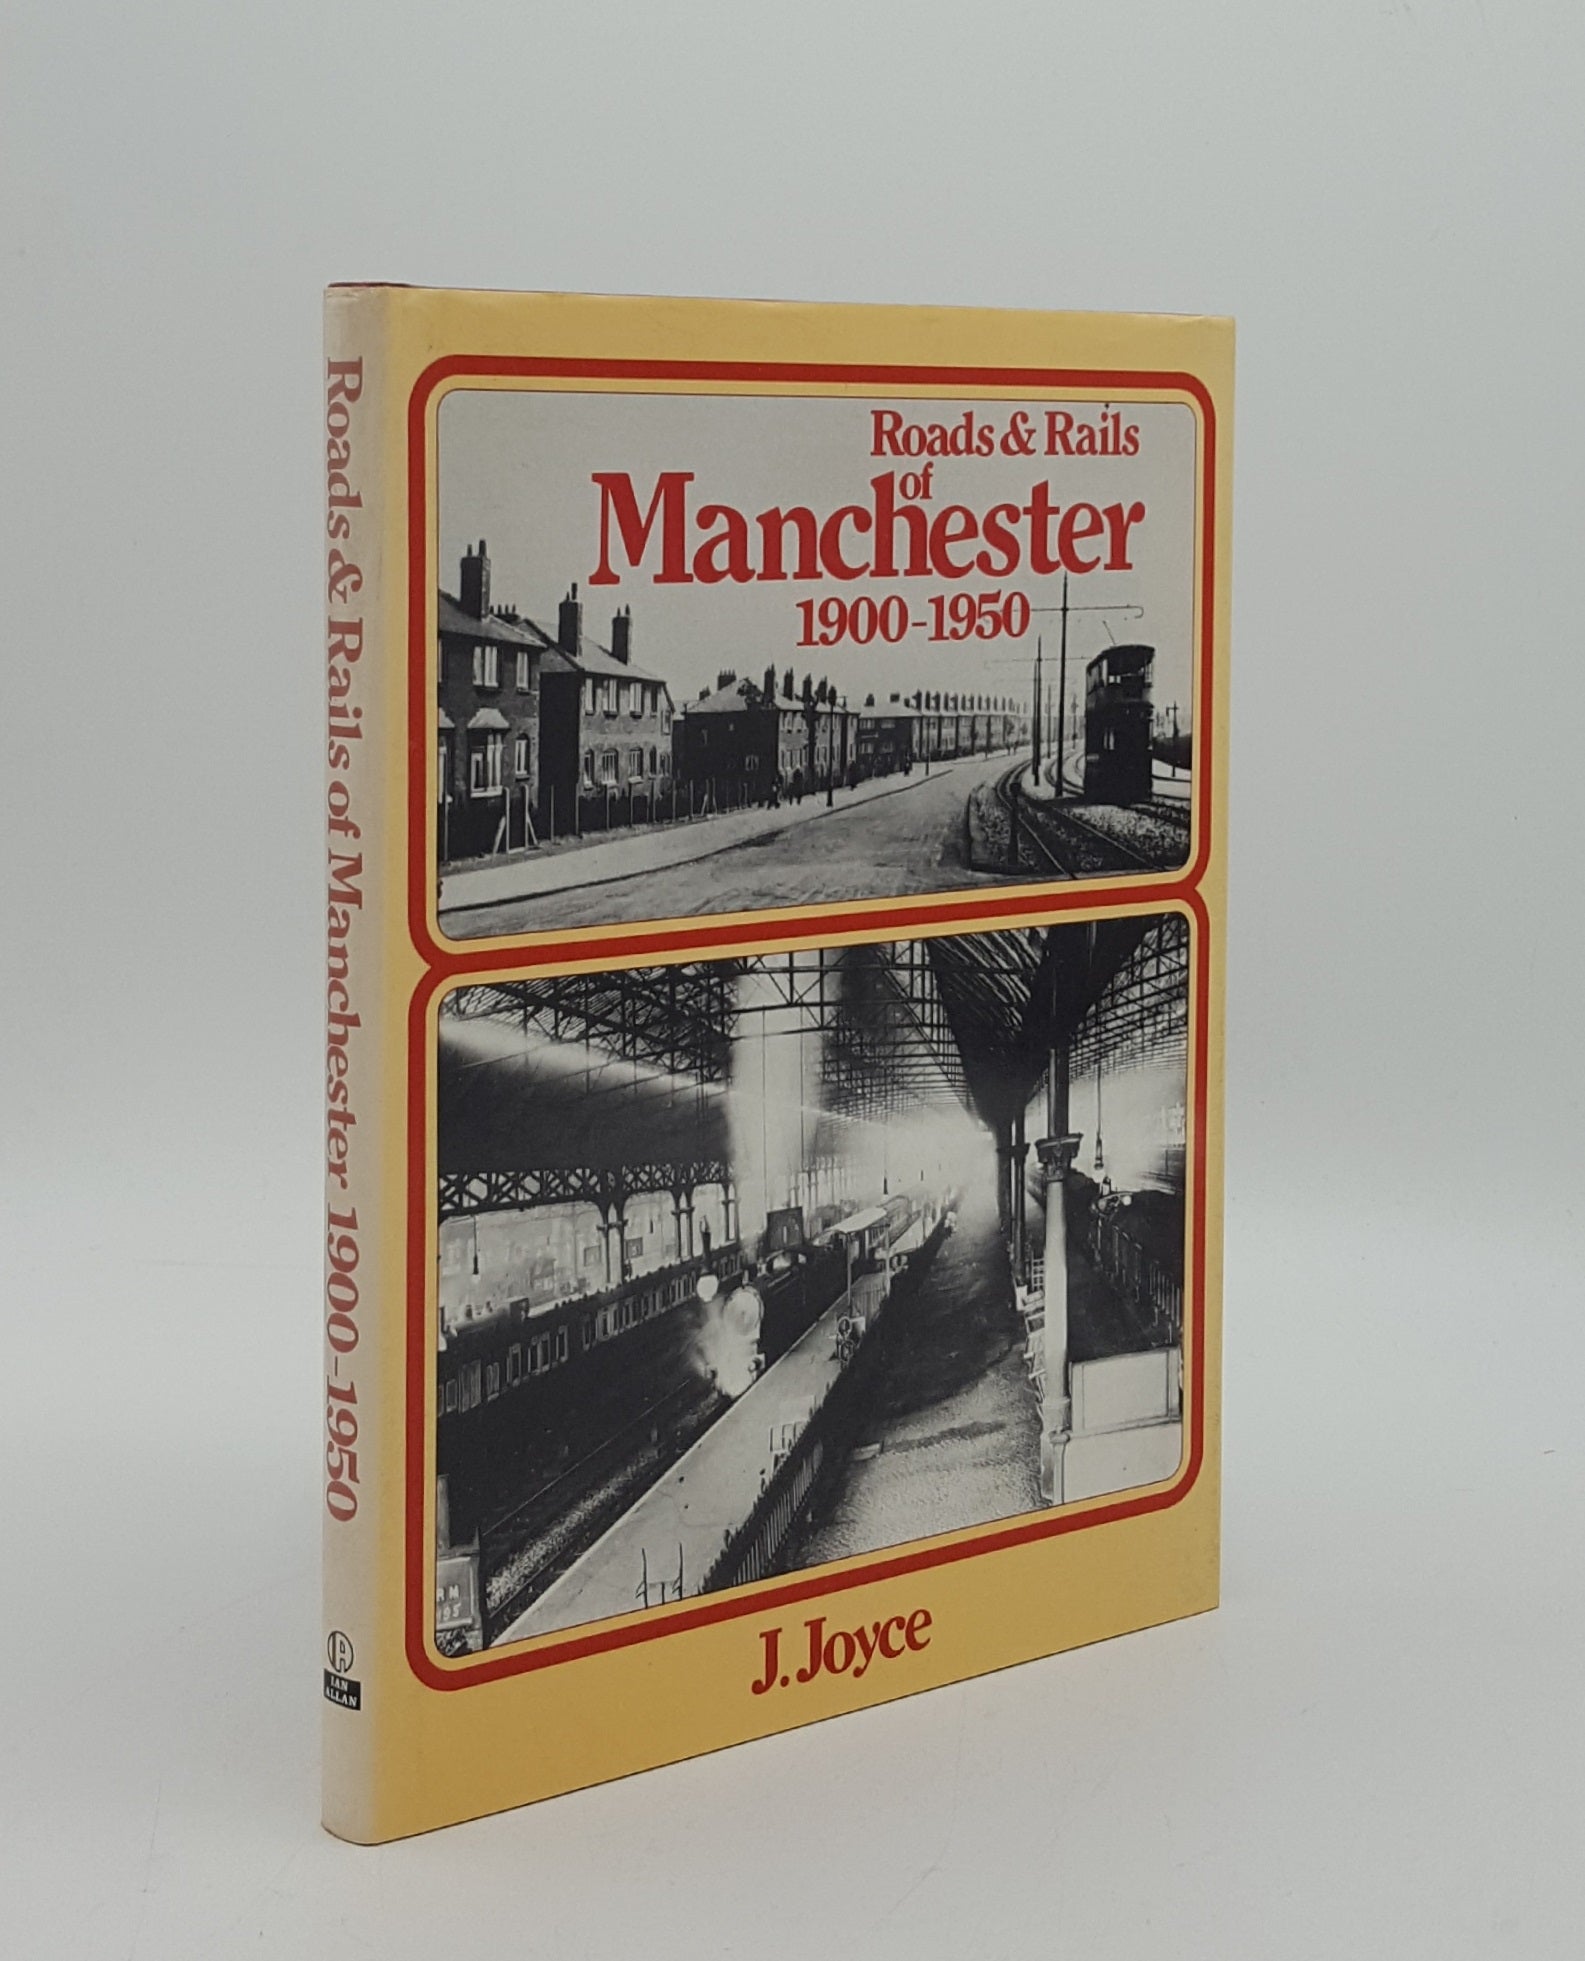 JOYCE J. - Roads and Rails of Manchester 1900-1950